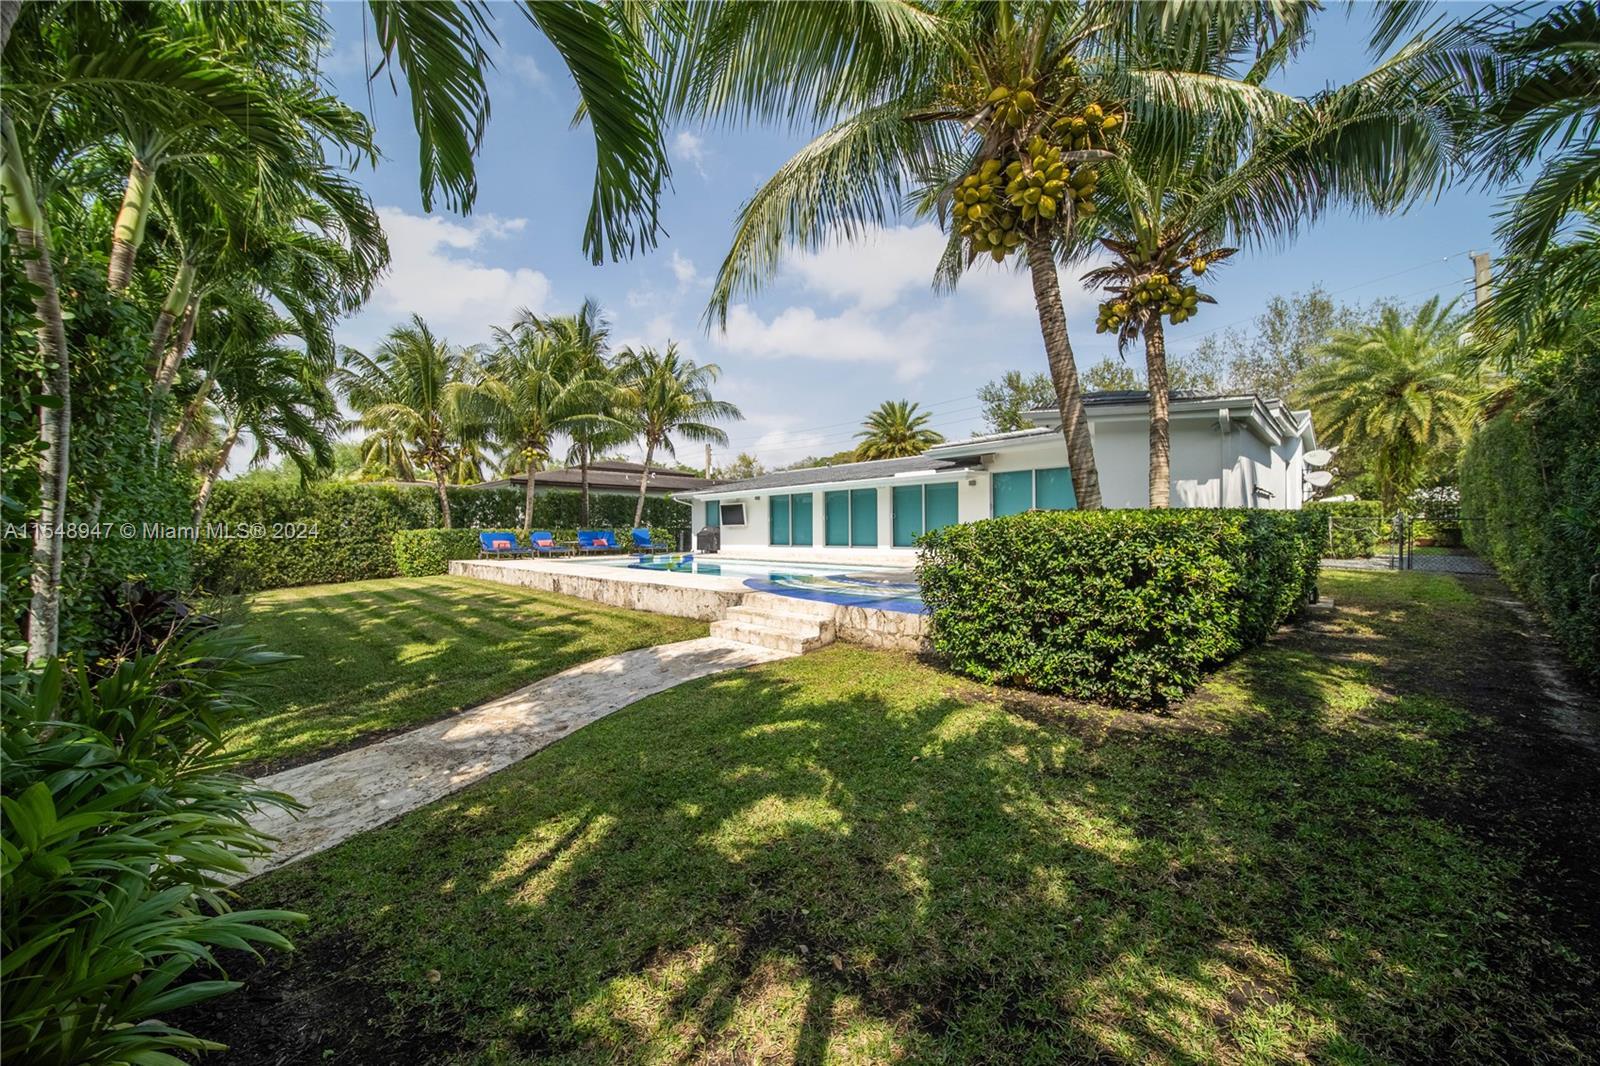 Photo of 4950 Riviera Dr in Coral Gables, FL